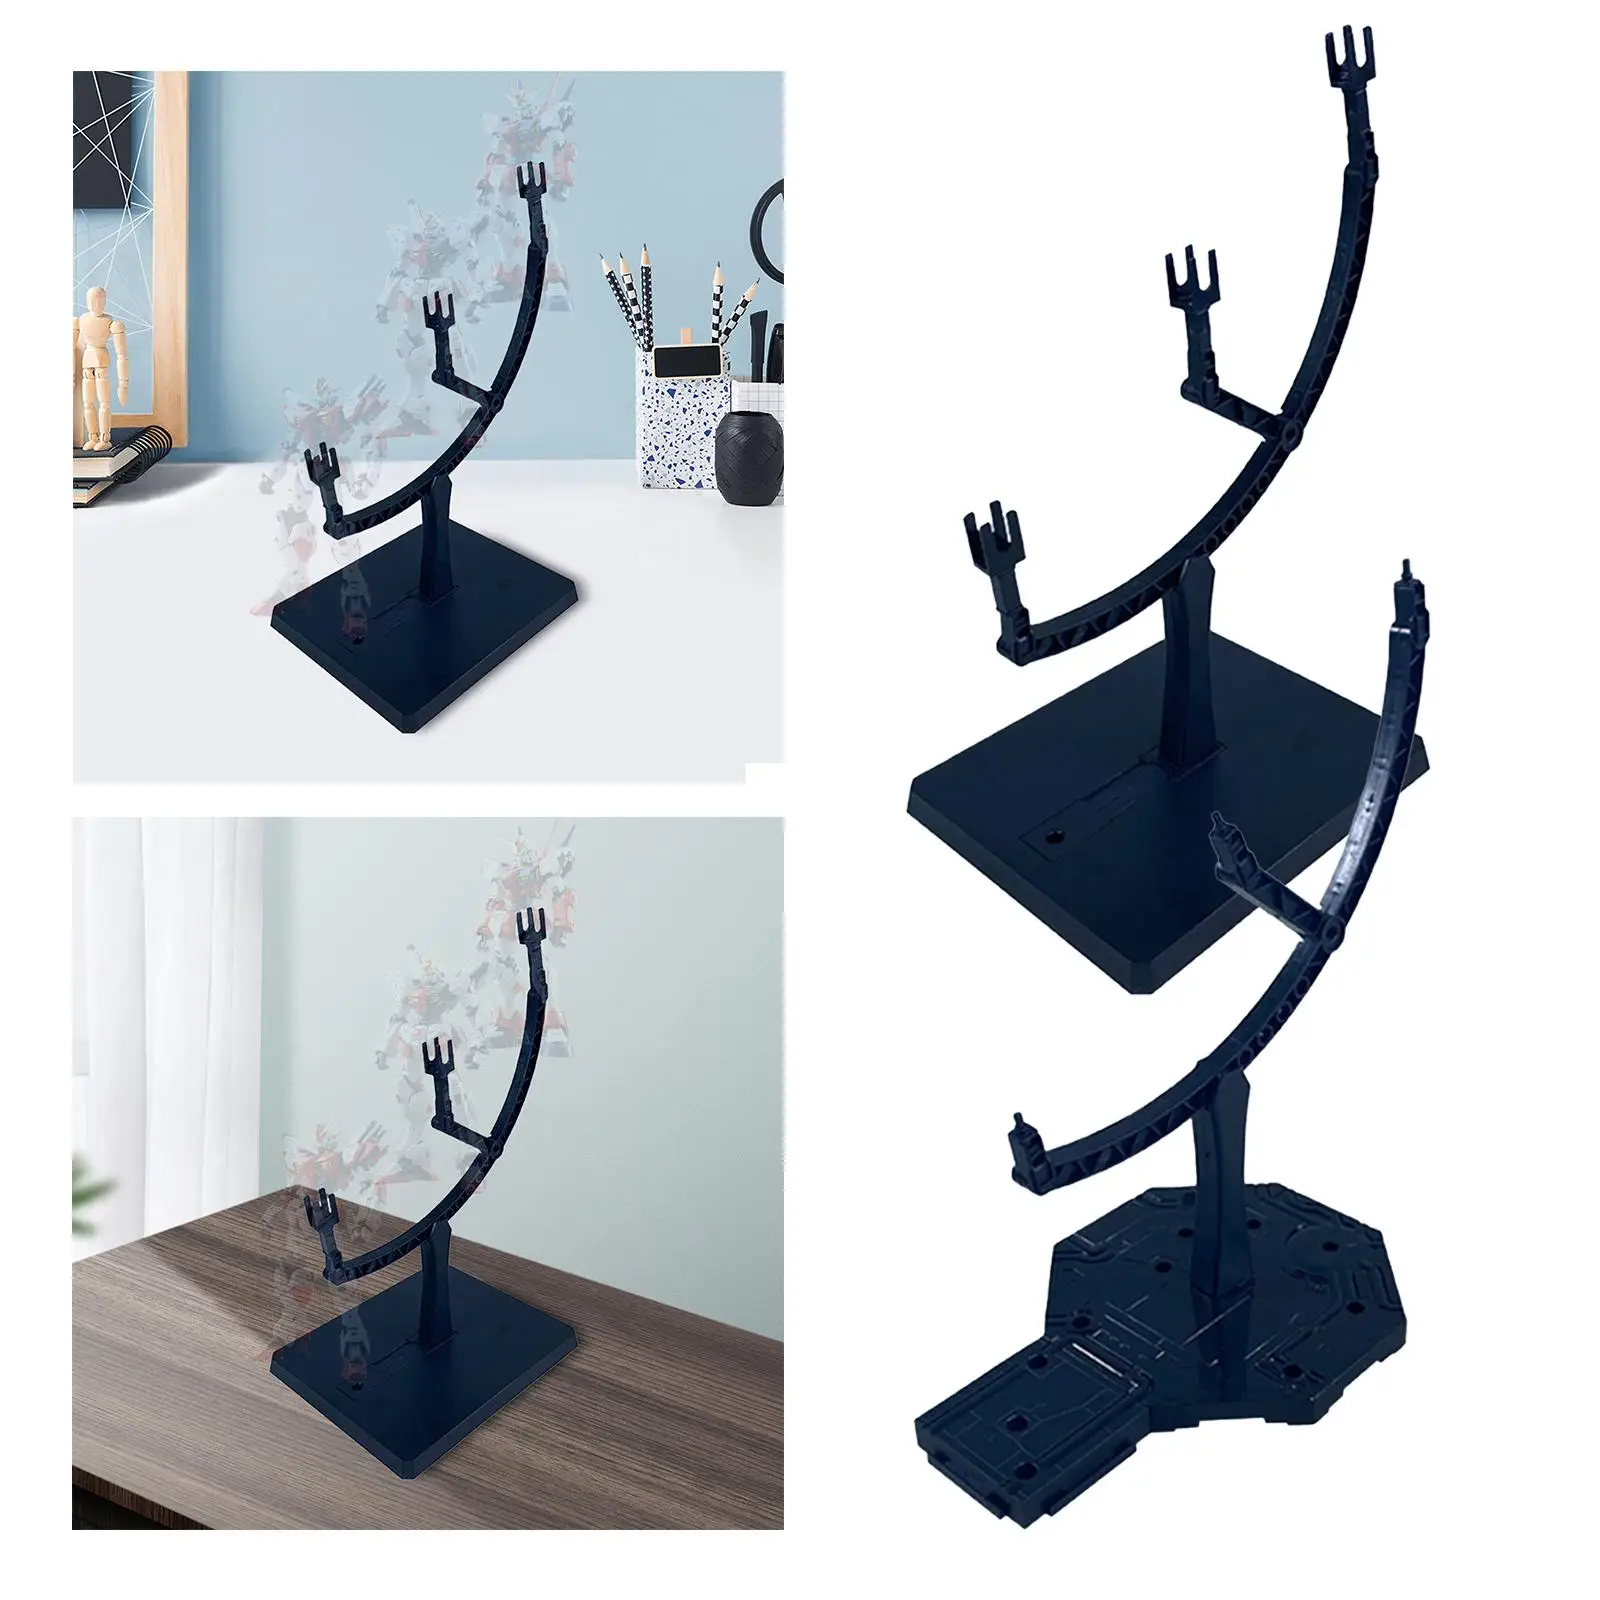 Action Figure Stand Rack Figure Support Base Portable Doll Stand Support Bracket for Tabletop Living Room Hg MG Shelf Decor